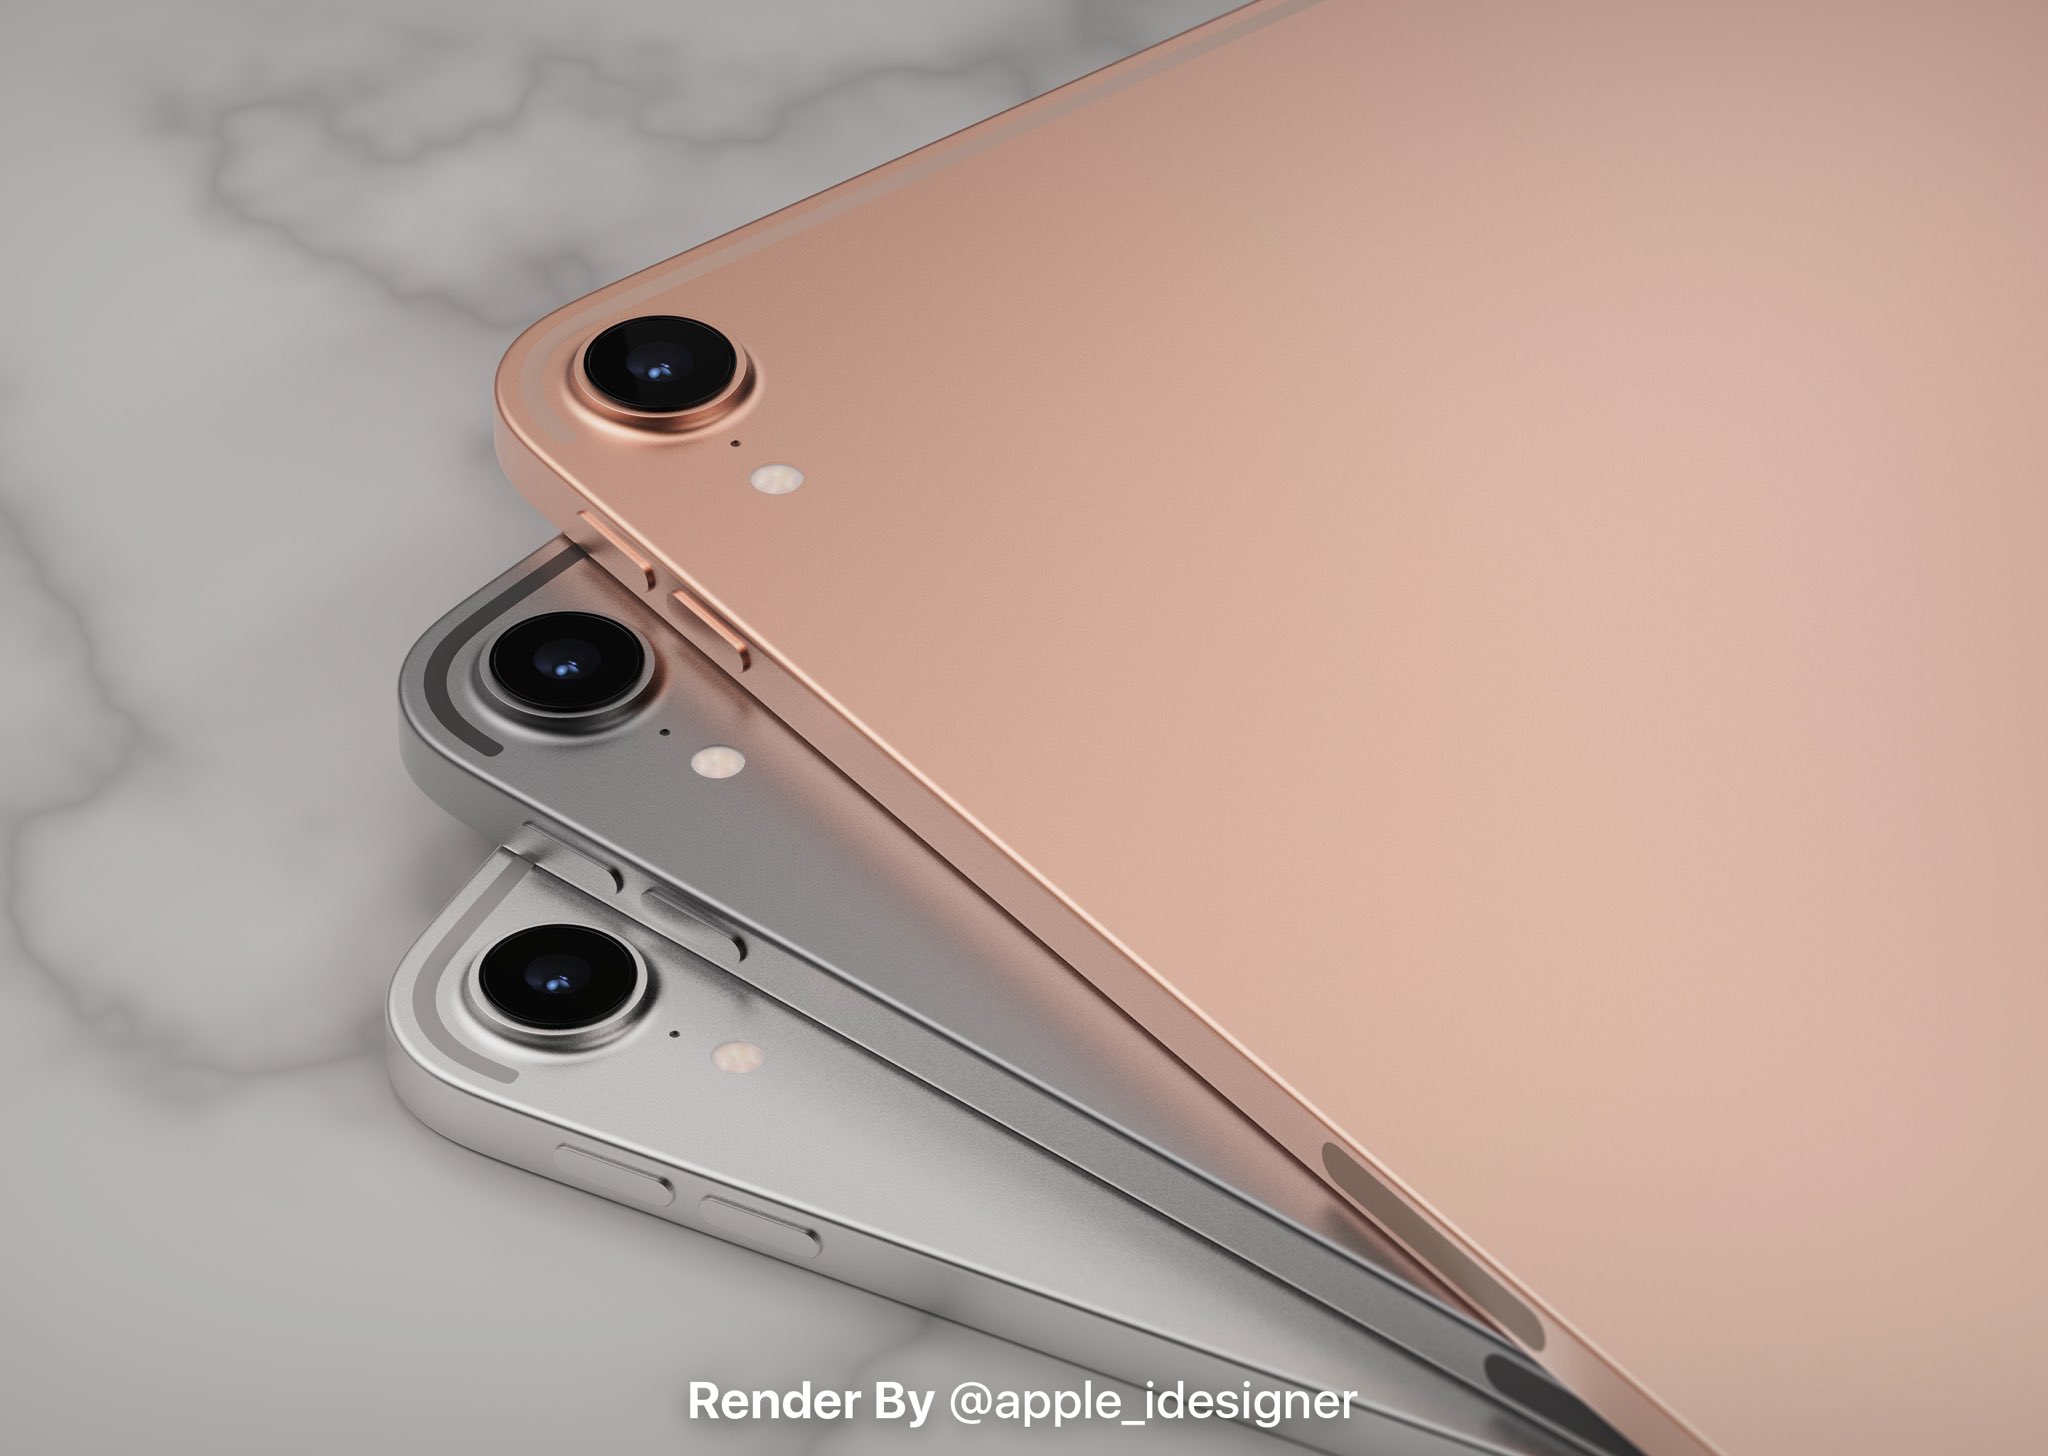 Ipad Air 4 Renders Leaked With Full Screen Design Uses Usb C Interface Task Boot